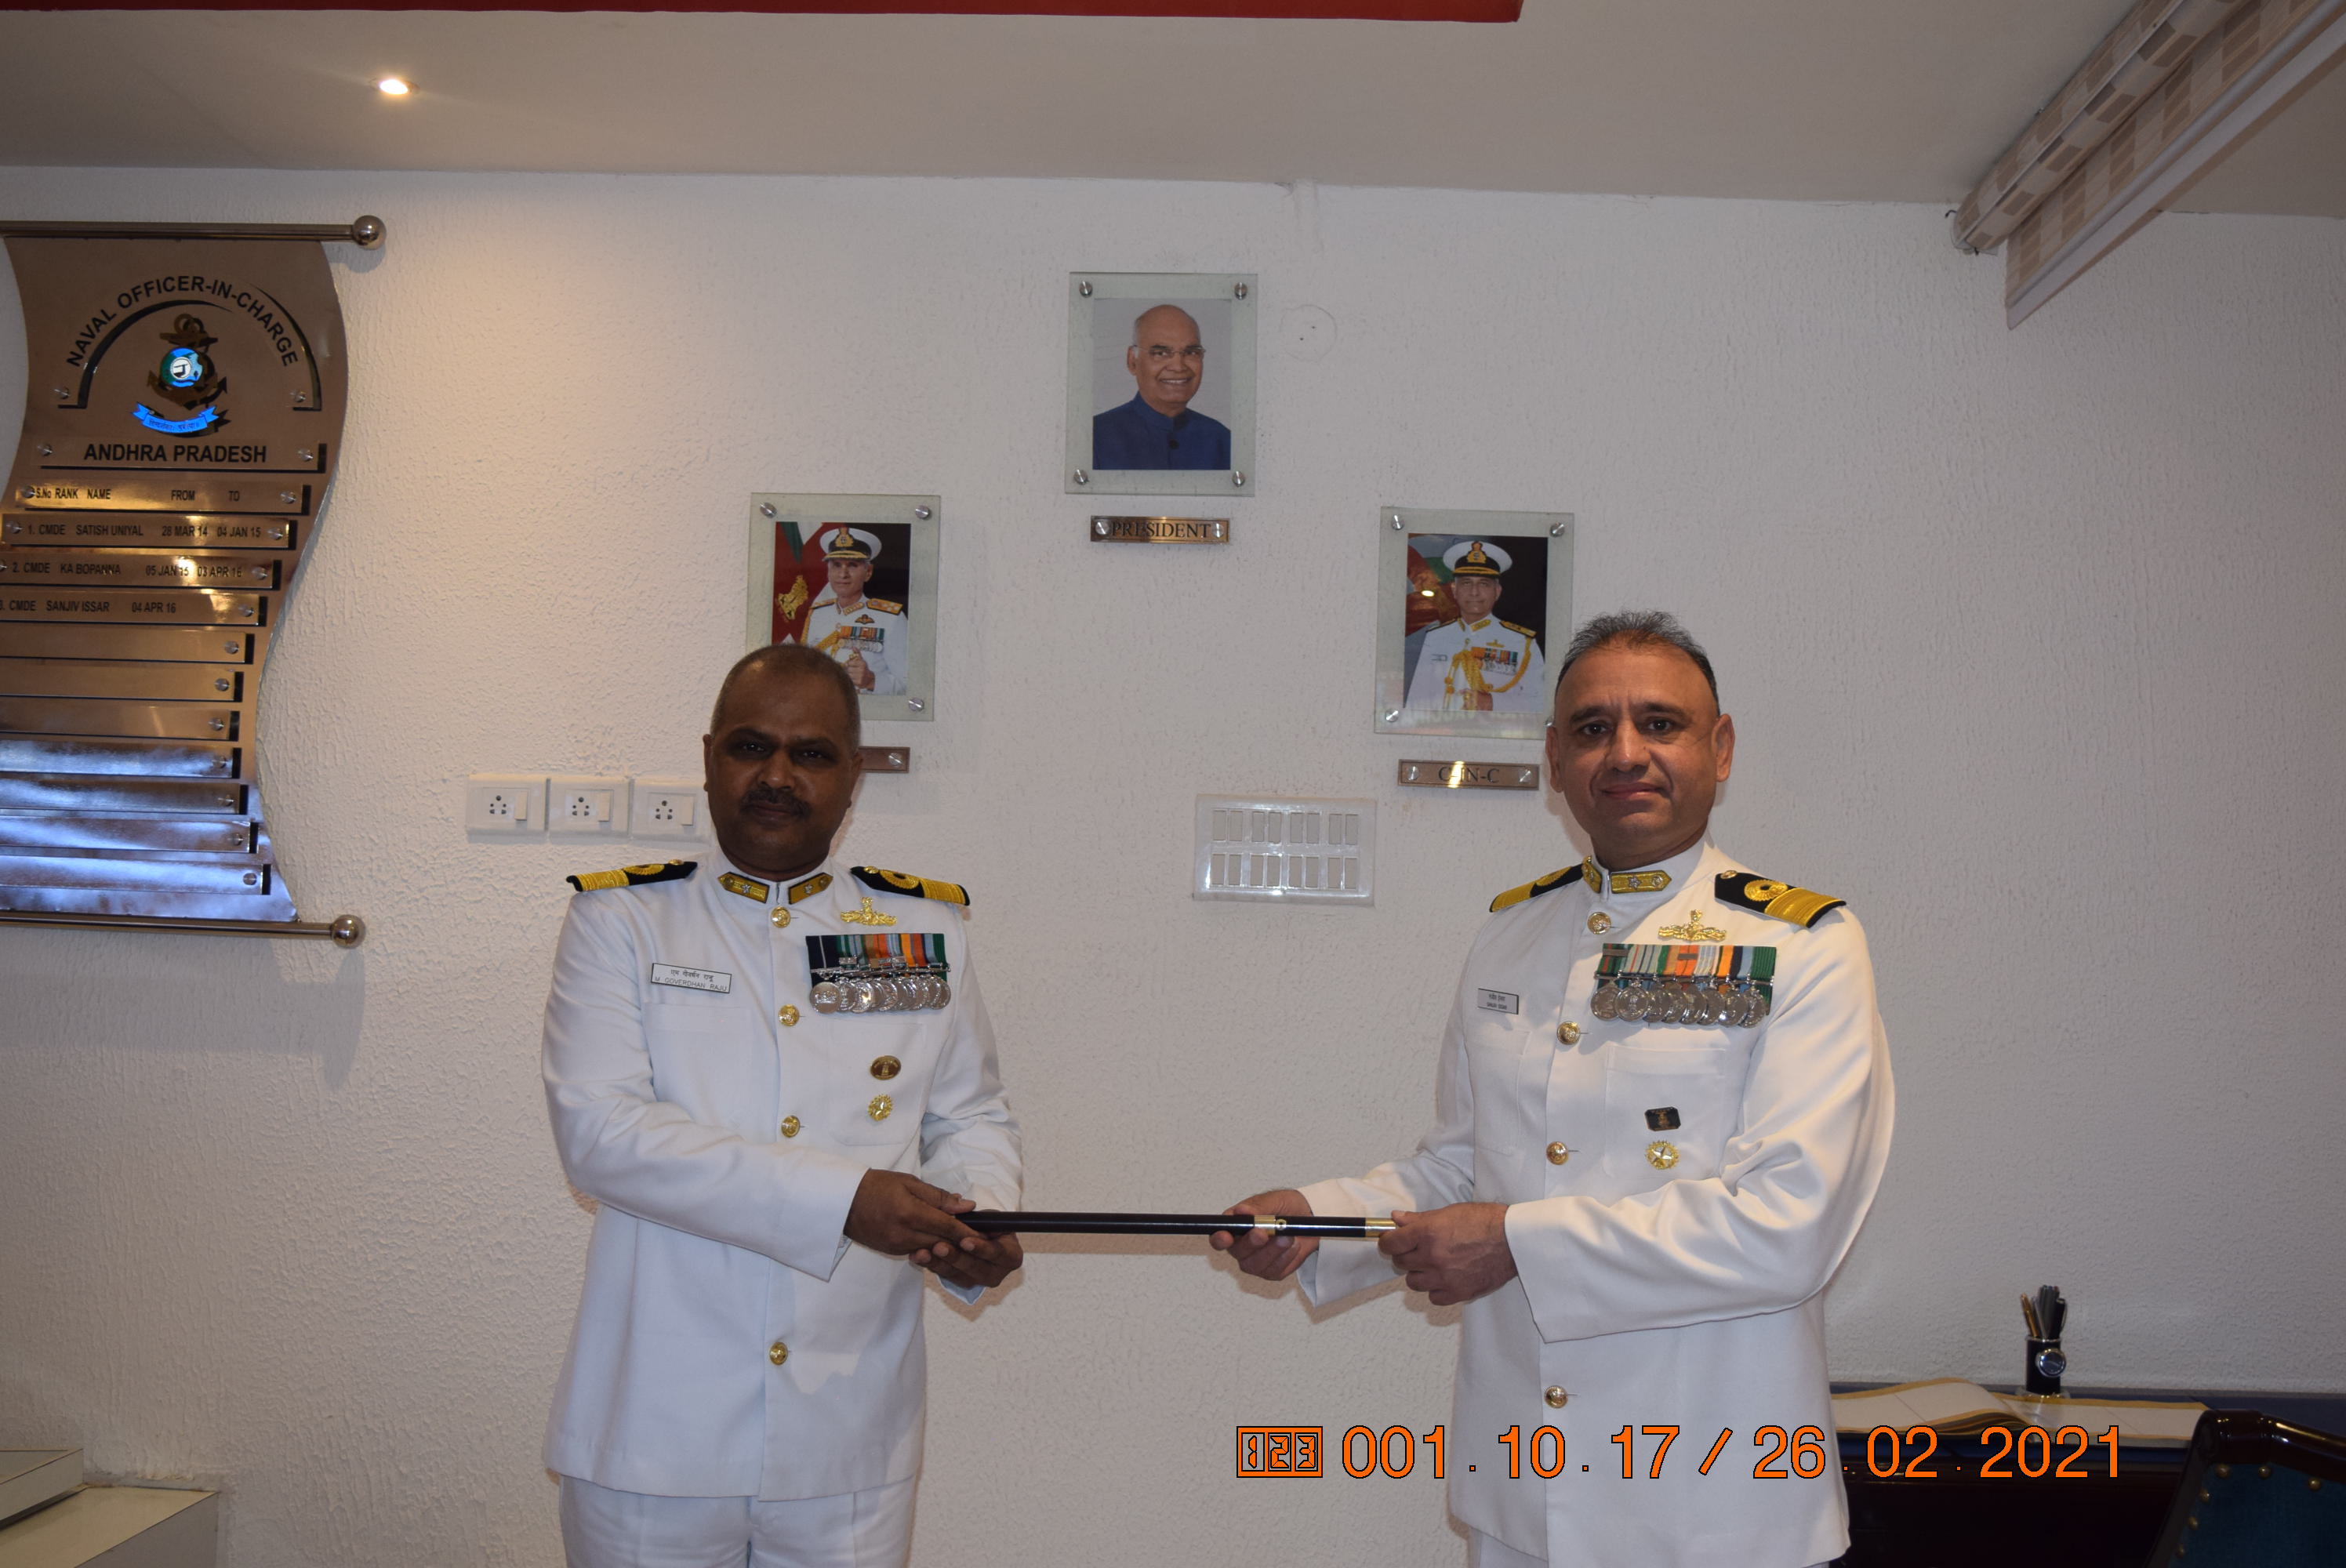 https://static.pib.gov.in/WriteReadData/userfiles/image/Cmde_MG_Raju__left__takes_over_as_the_Naval_Officer-in-Charge__Andhra_Pradesh__from_Commodore_Sanjiv_Issar__right_2CUM.JPG